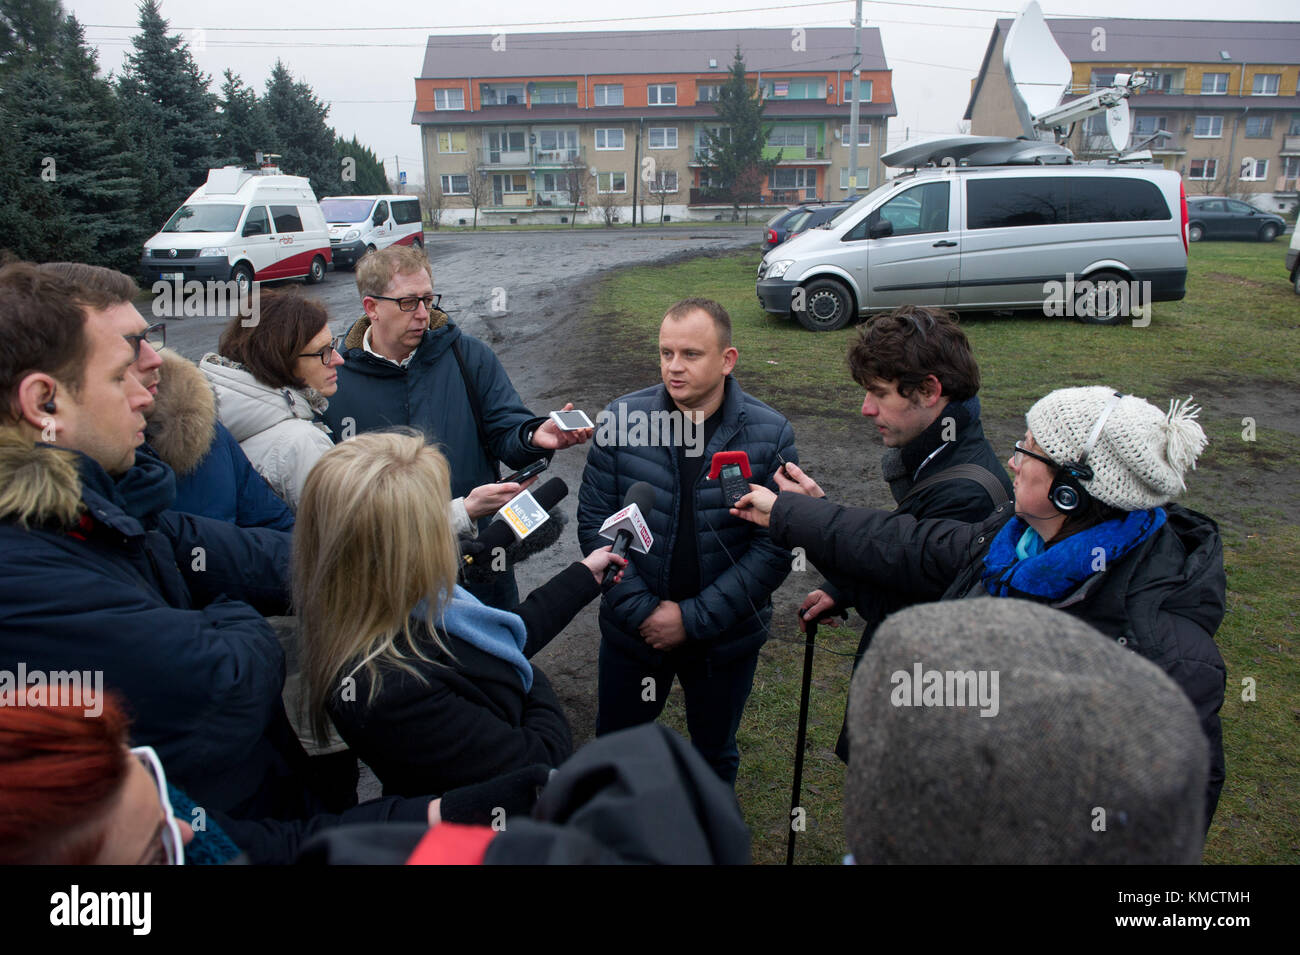 Sobiemysl, Poland. 20th Dec, 2016. ARCHIVE - The Polish haulage contractor Ariel Zurawski speaks to journalists during a press conference in Sobiemysl, Poland, 20 December 2016. His truck became the vehicle for terrorism. His cousin and driver of the truck was shot. One year after the terror attack, Zurawski is still plagued by grief and financial worries. Credit: Stefan Sauer/dpa-Zentralbild/dpa/Alamy Live News Stock Photo